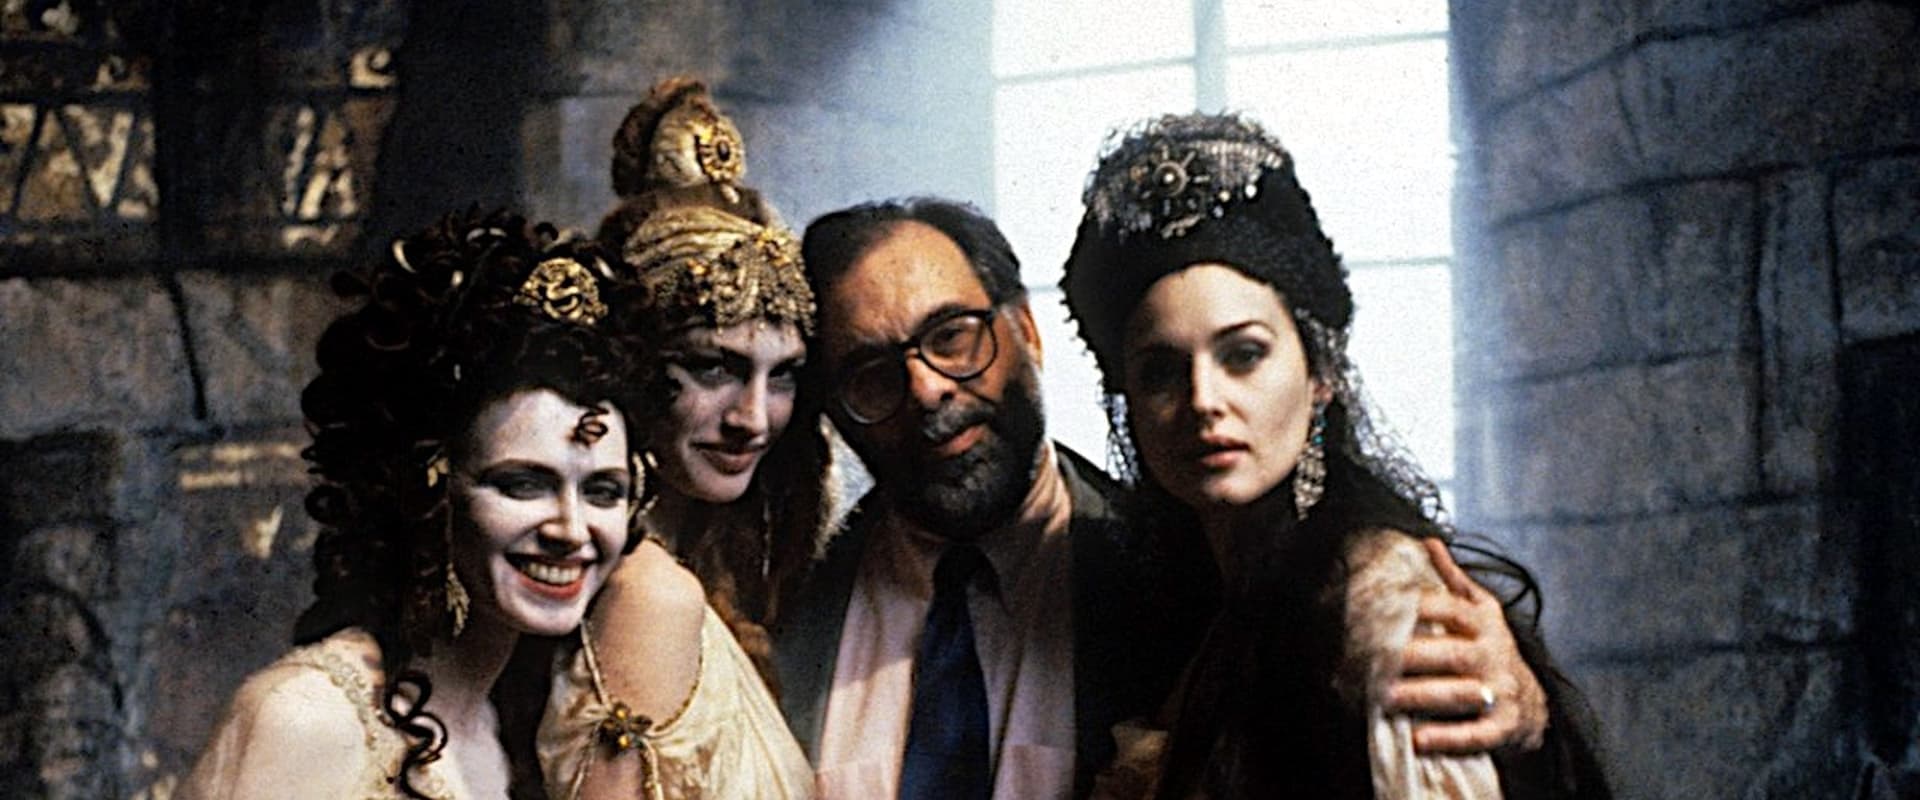 The Blood Is the Life: The Making of 'Bram Stoker's Dracula'